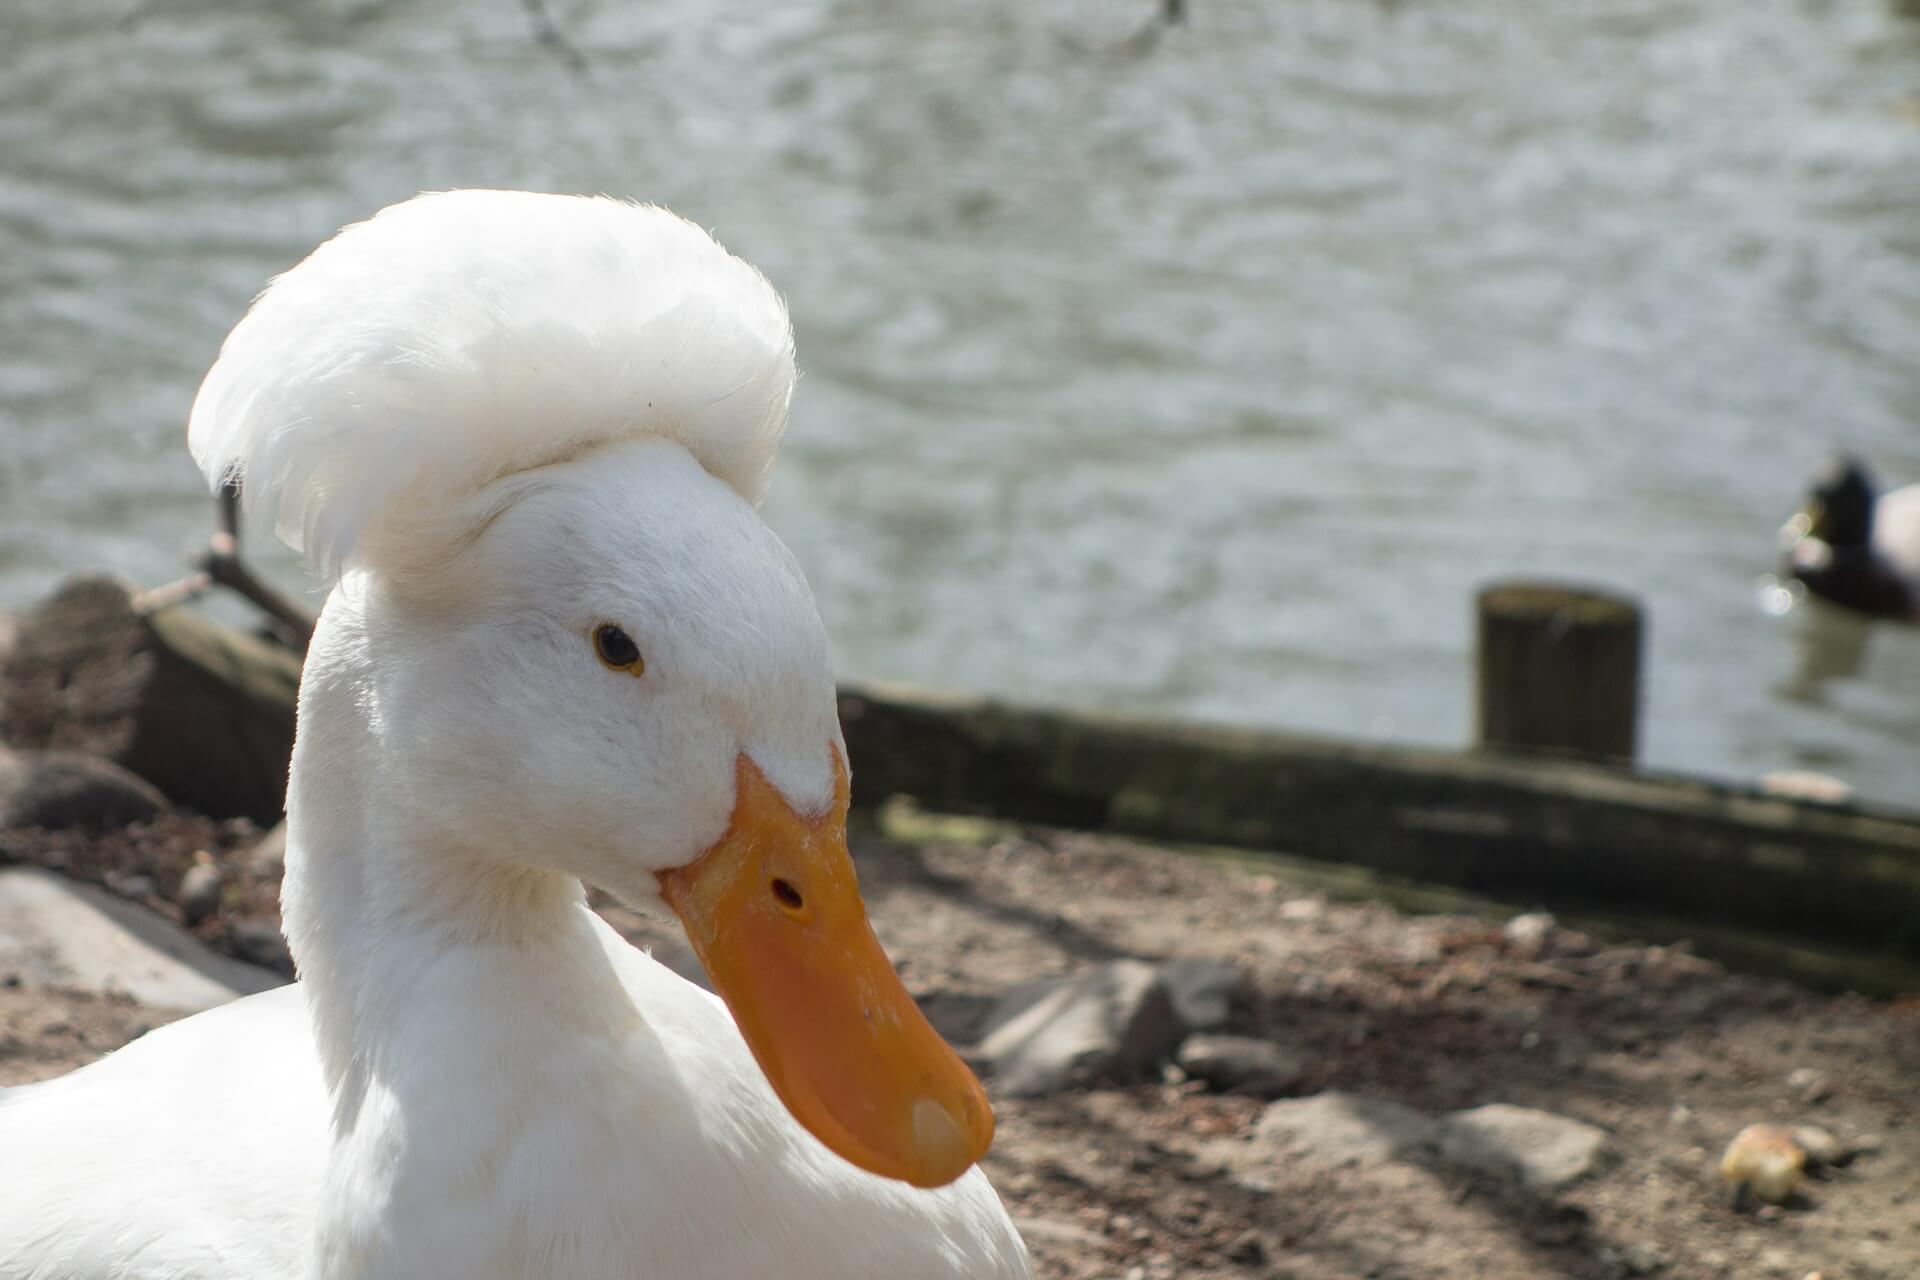 duck-breeds-14-breeds-you-could-own-and-their-facts-at-a-glance